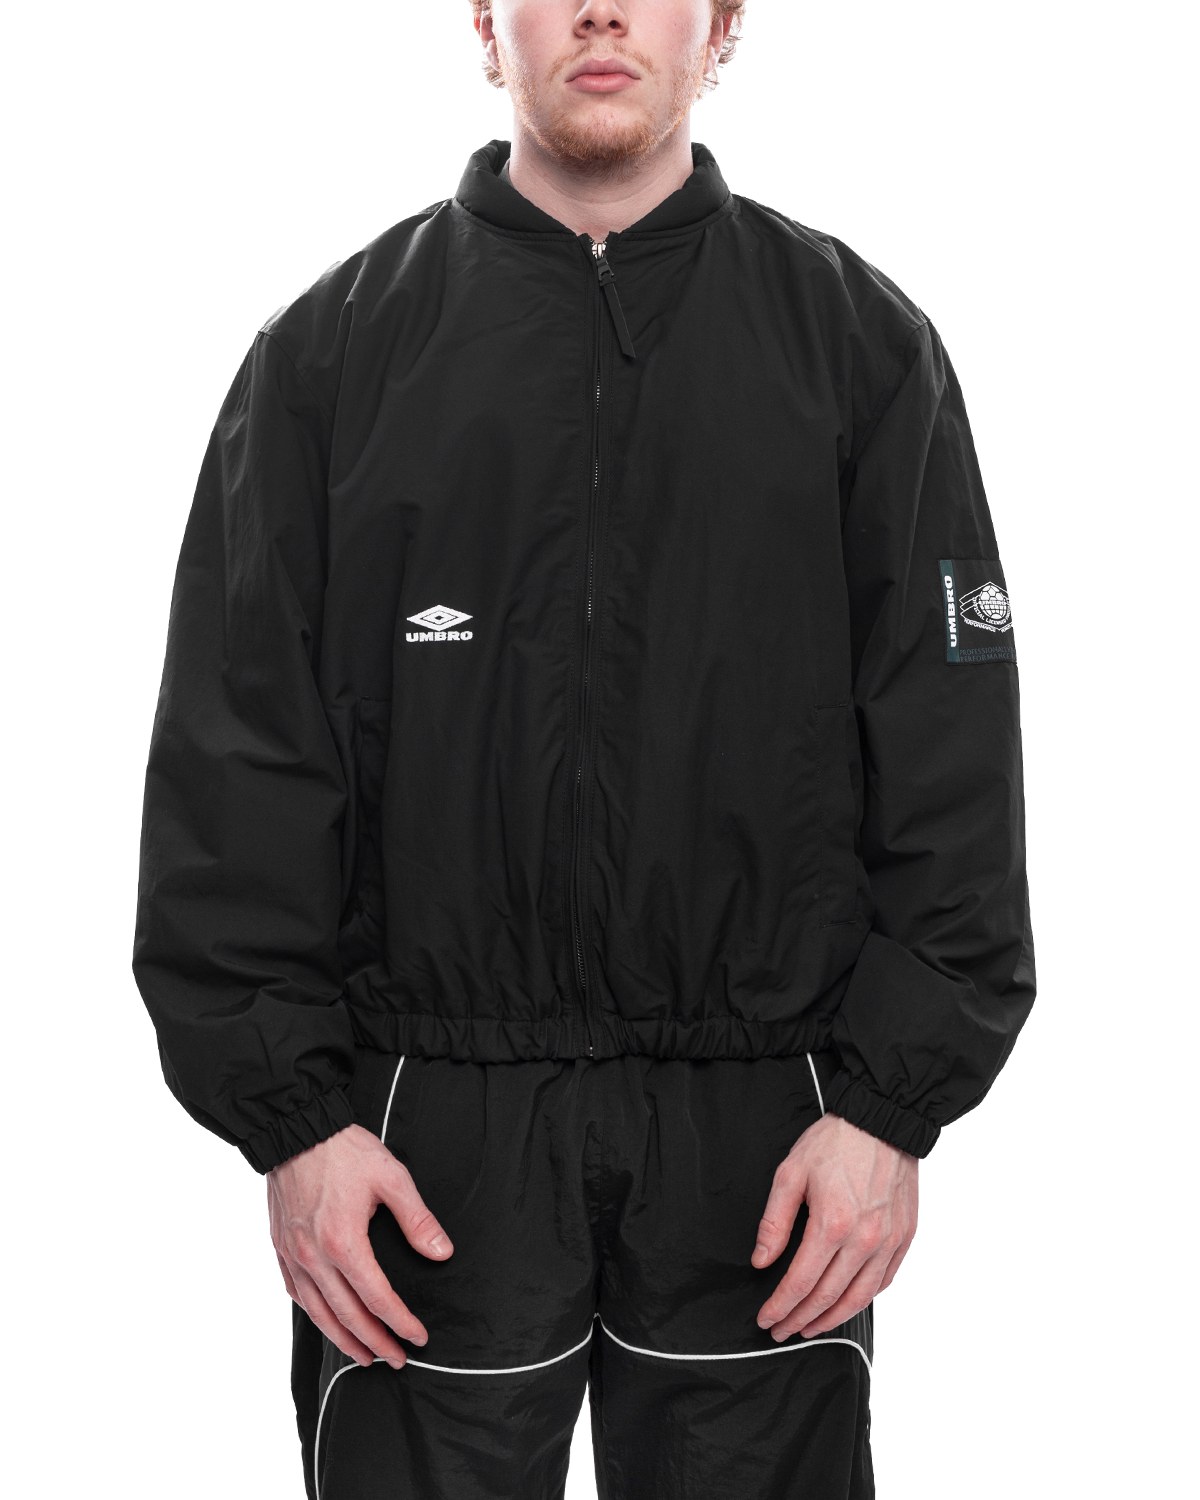 UMBRO PENALTY CULTURE TRACK JACKET